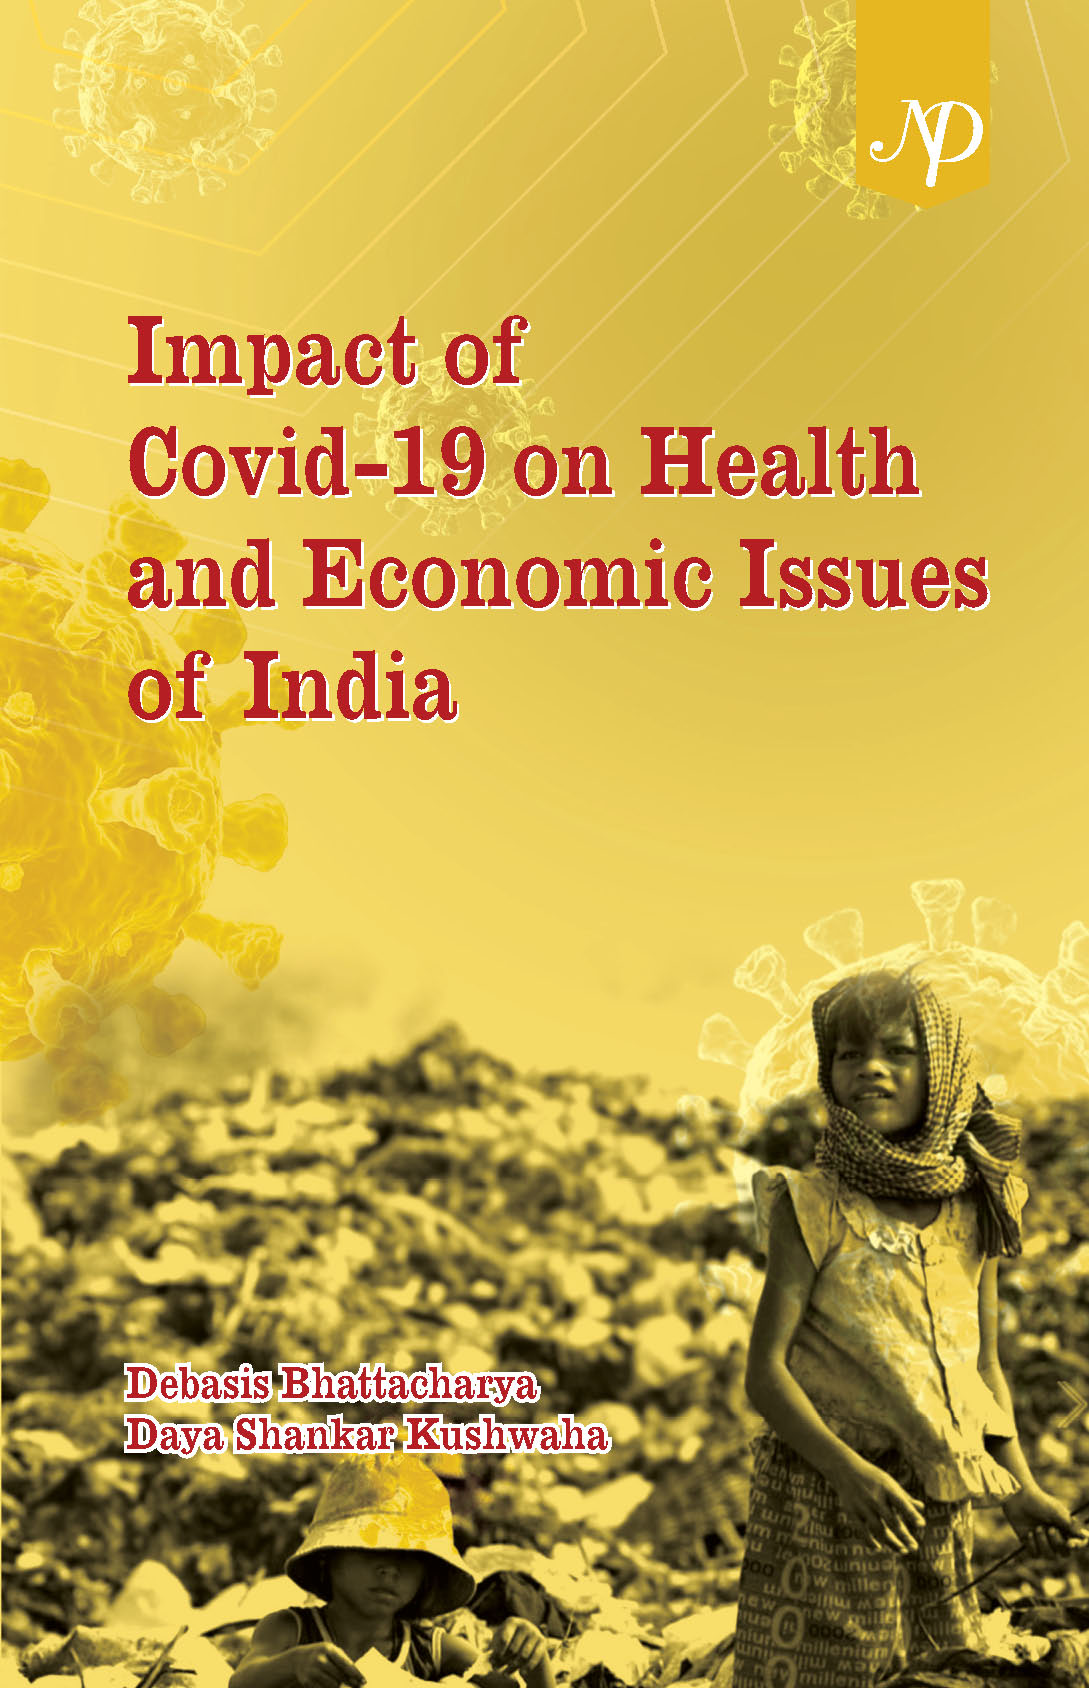 Impact of Covid-19 on Health and Economic Issues of India